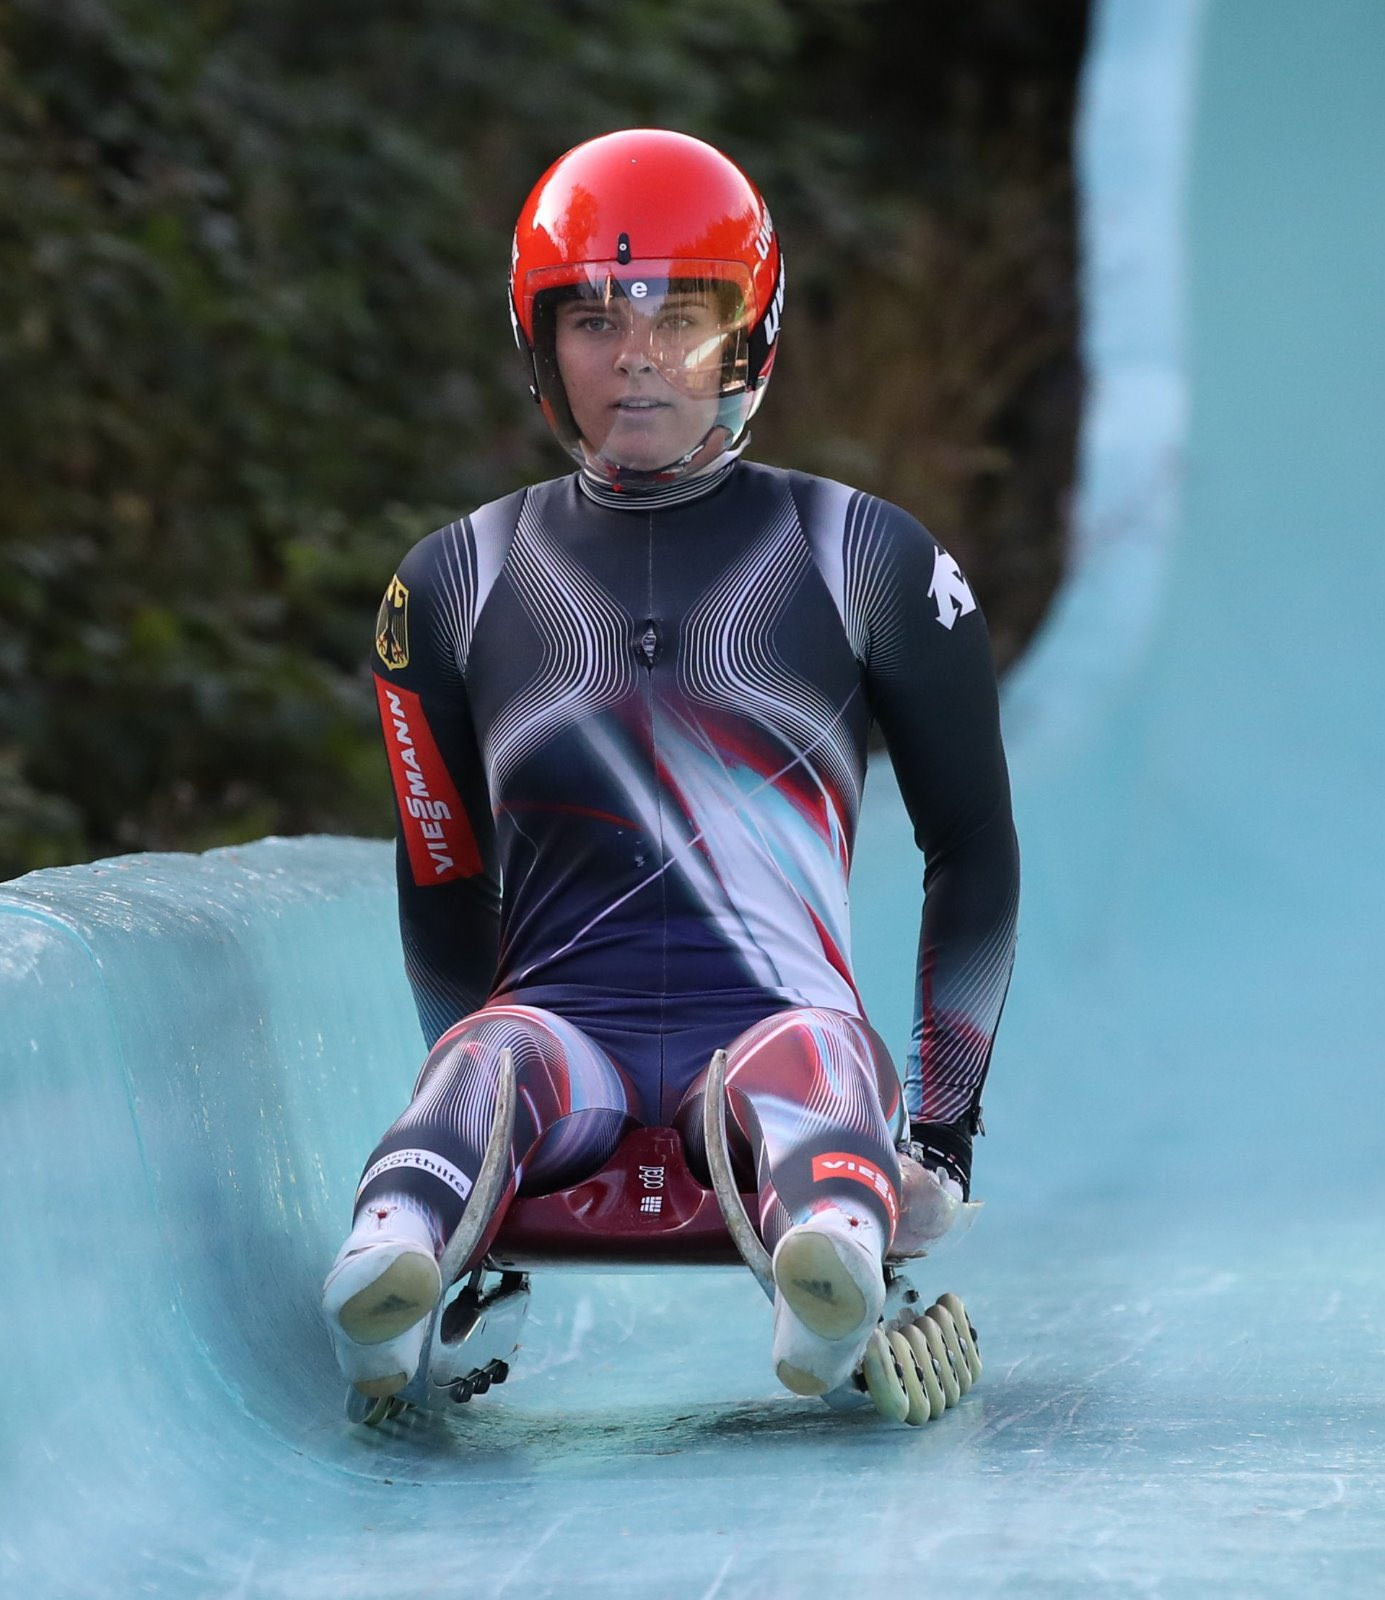 The Summer Luge Cup has been held for 27 years ©FIL